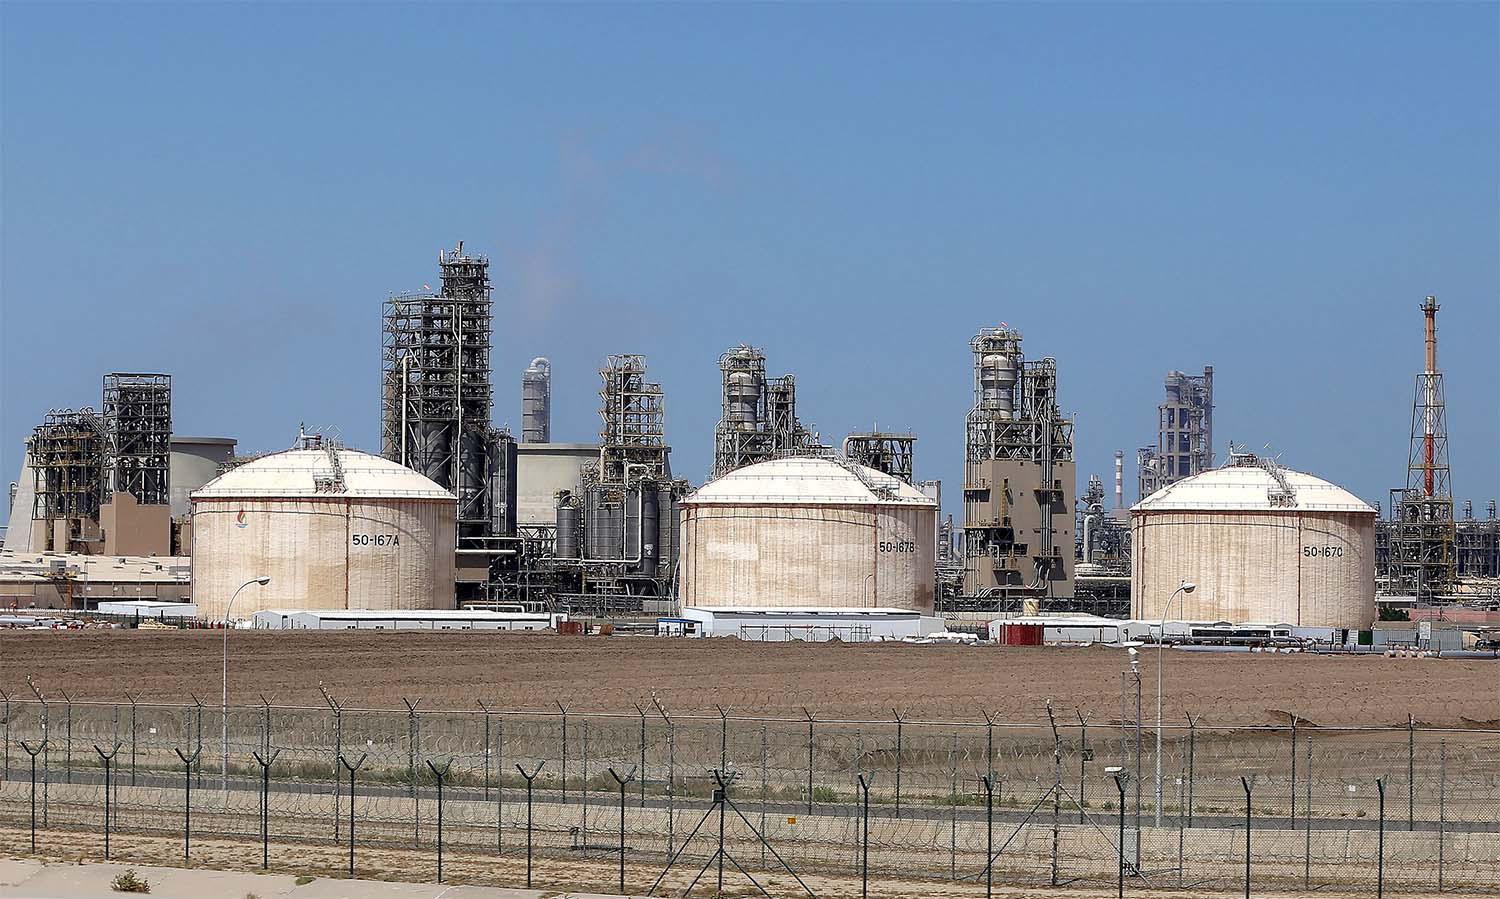 The Shuaiba oil refinery south of Kuwait City